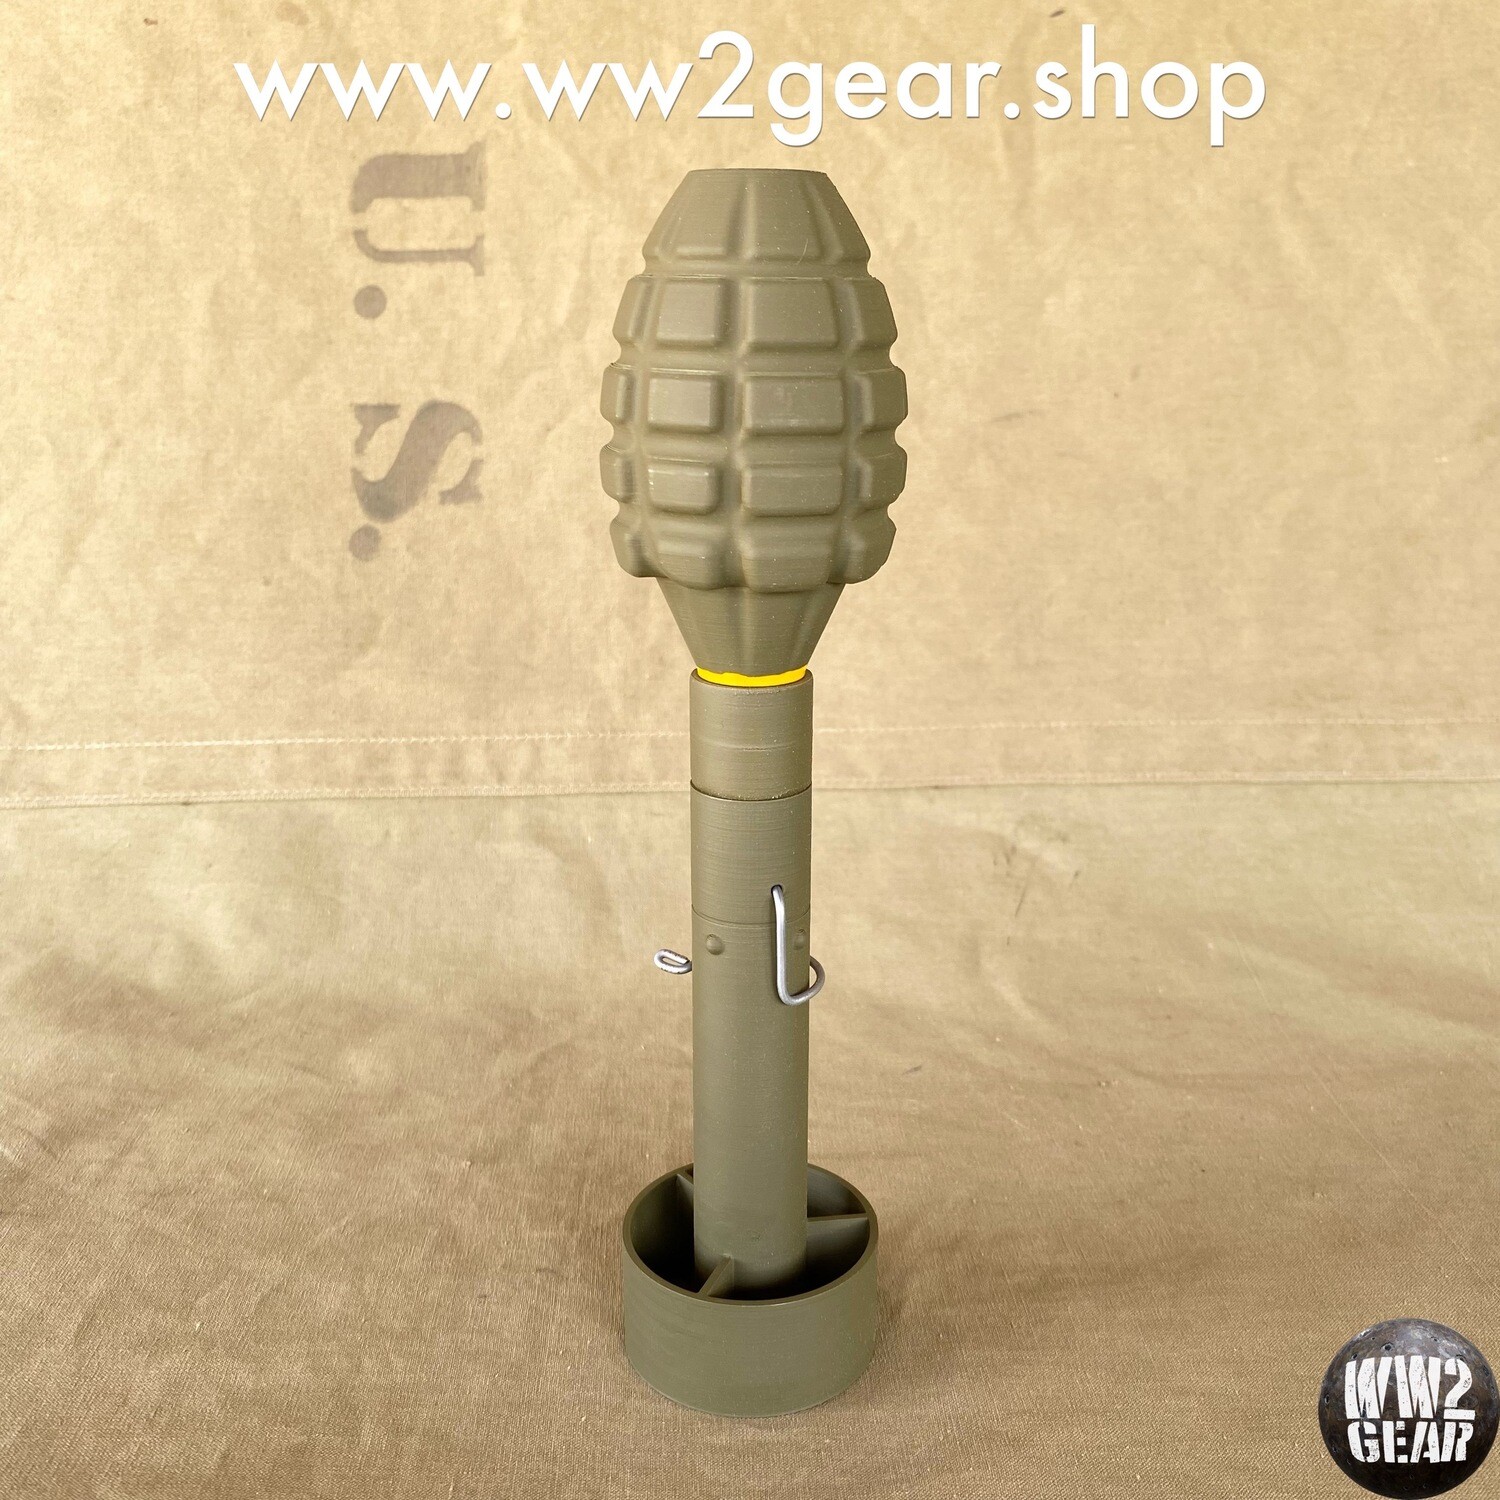 US WW2 M17 Rifle Grenade - OD Green (3D Printed Reproduction)